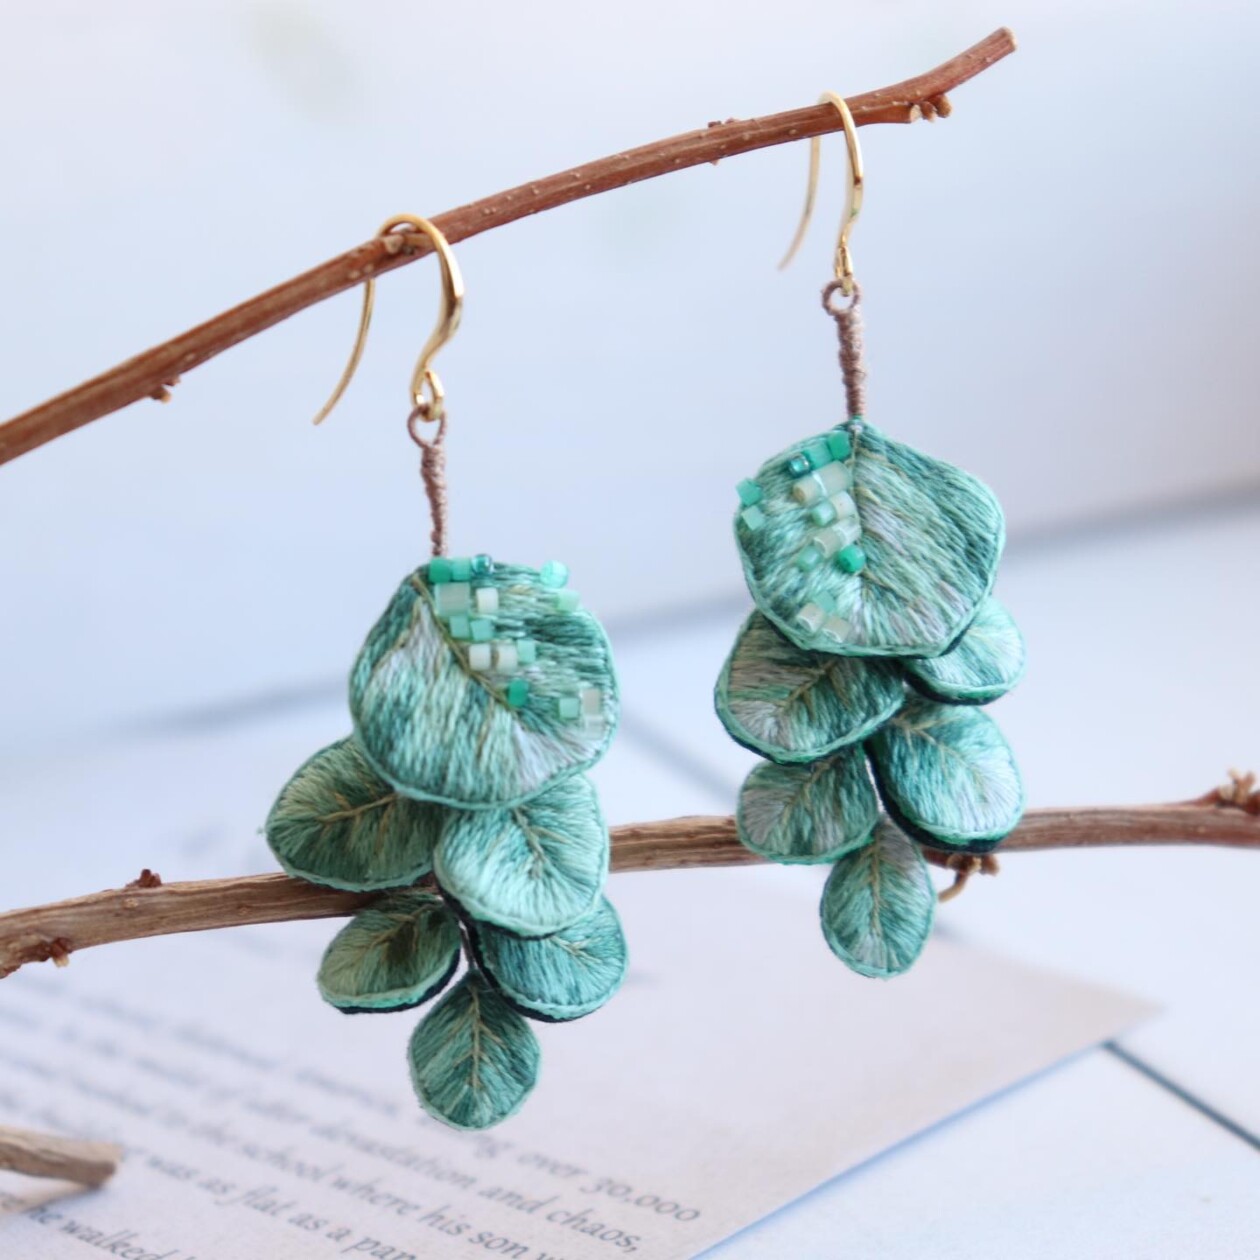 Eye Catching Handmade Embroidered Earrings By Vivaembr (7)